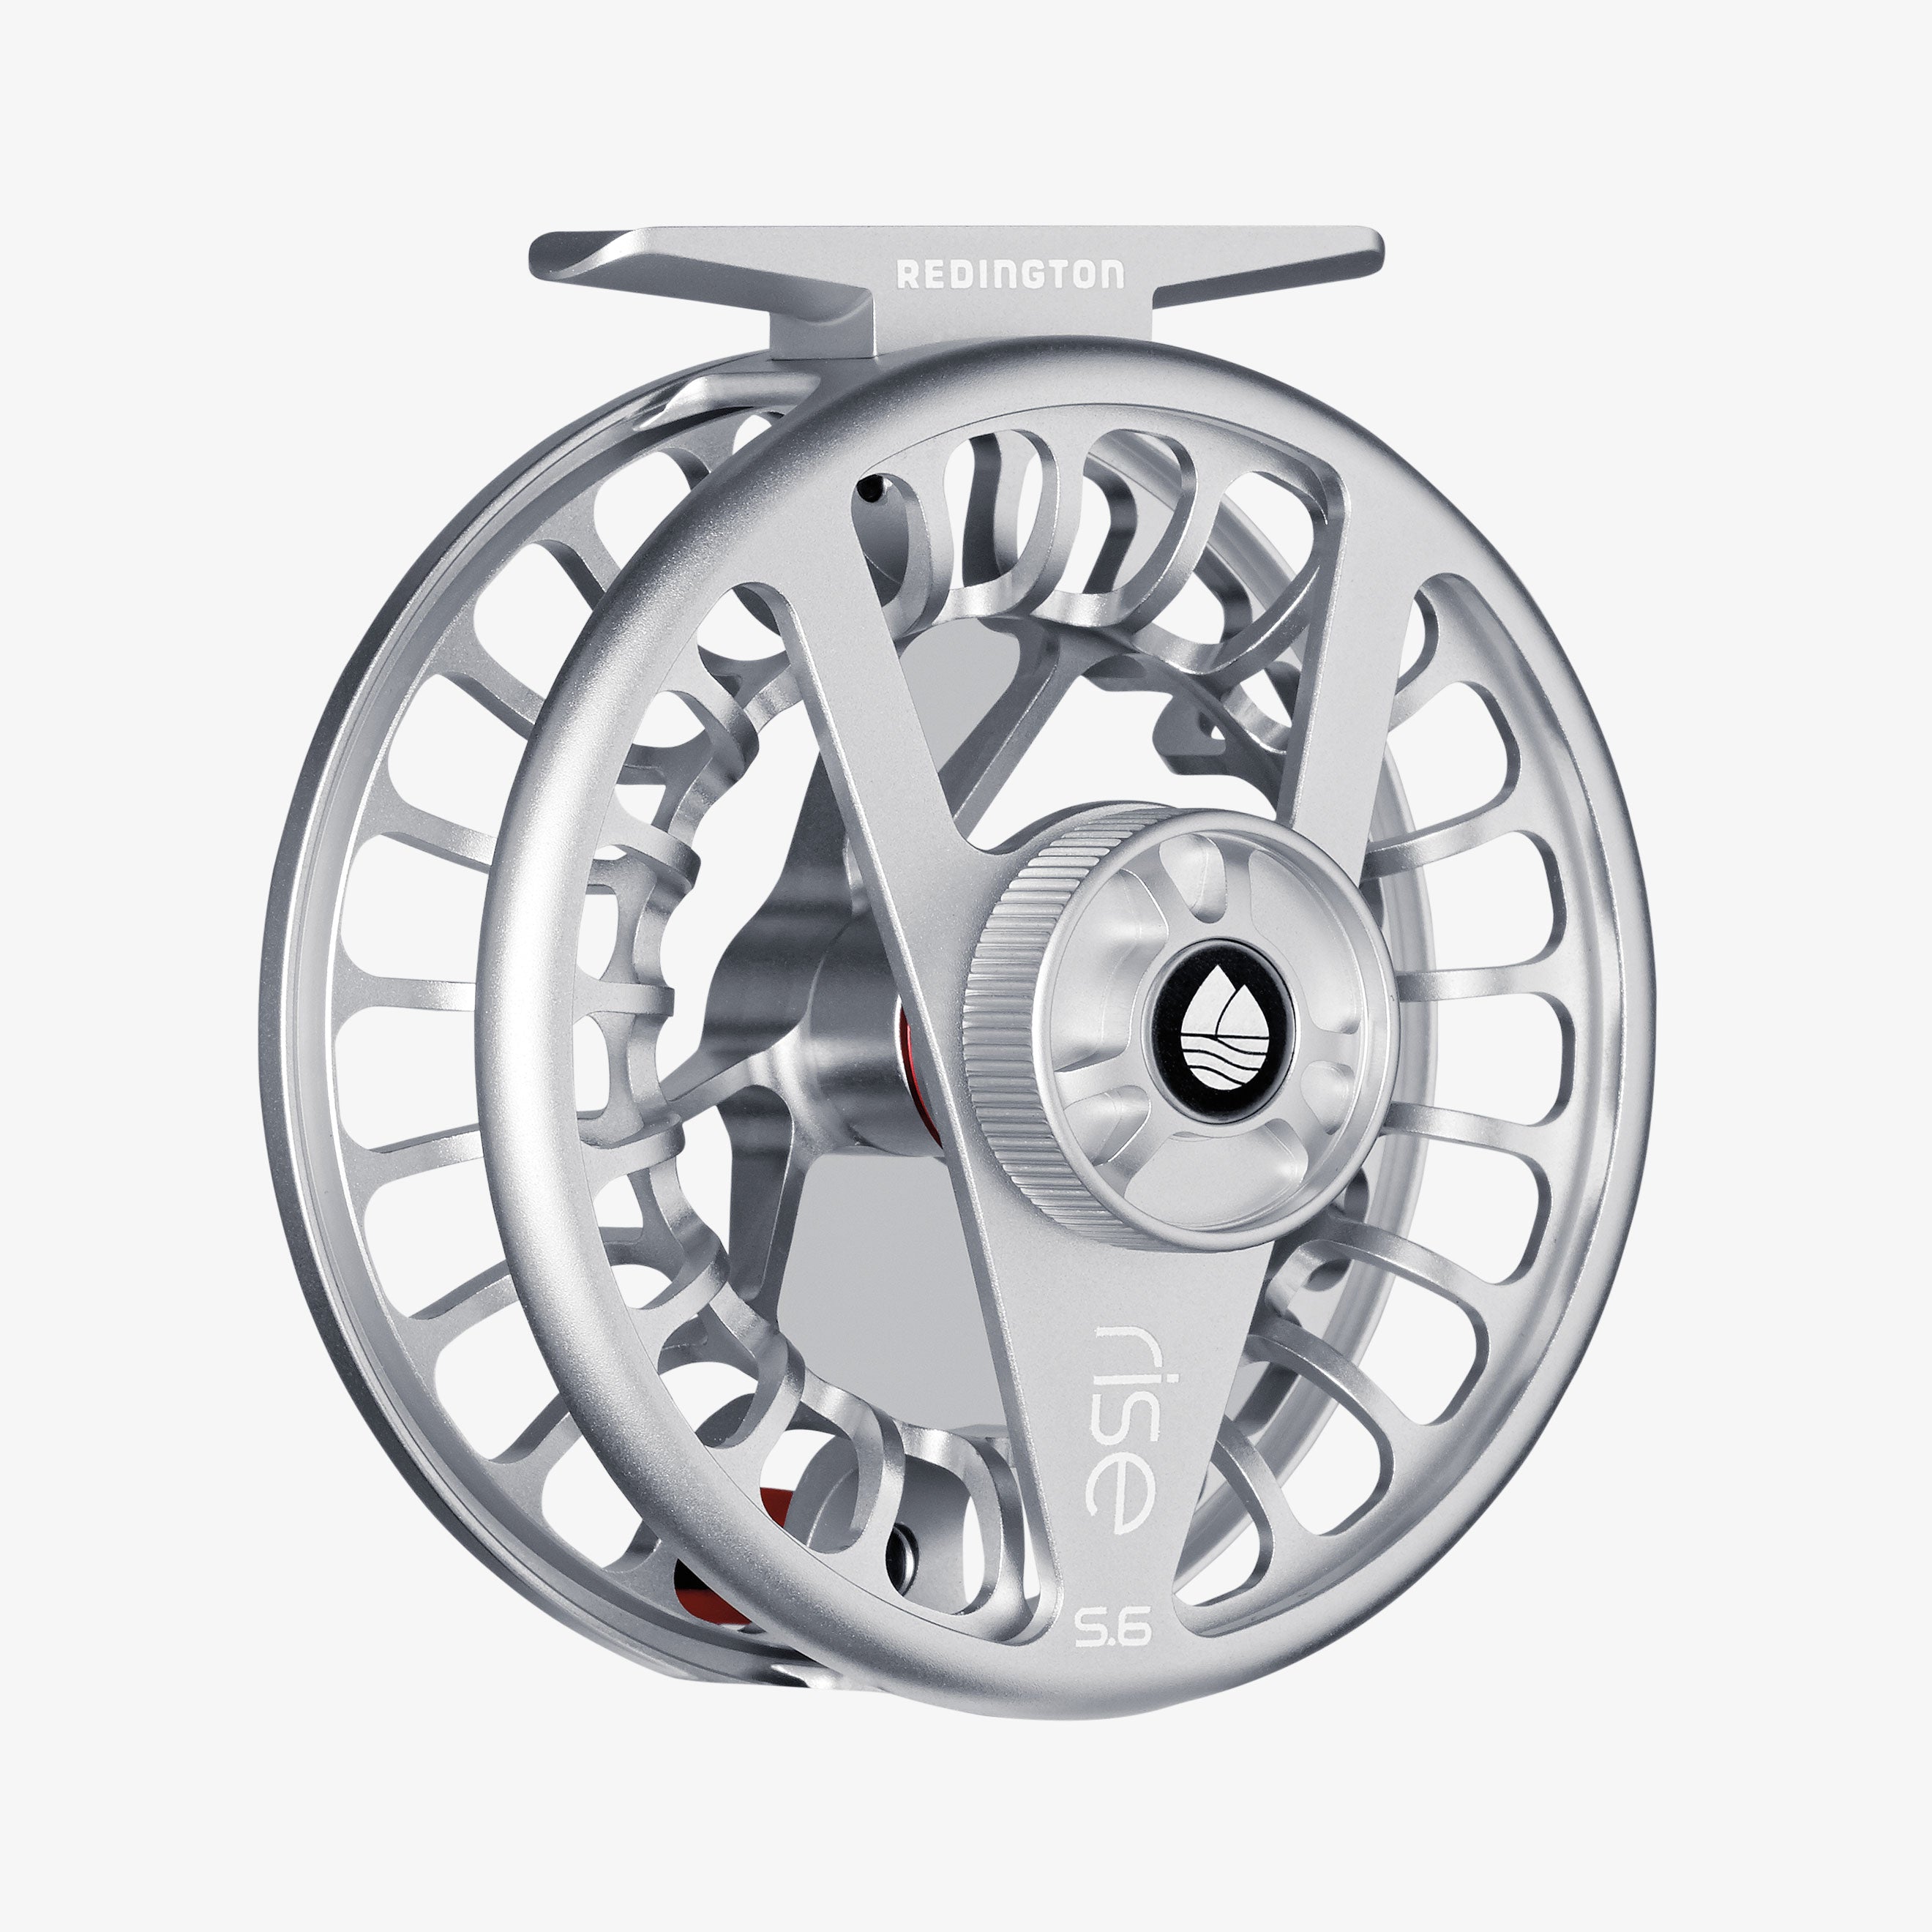 redington reel reviews Archives 1 - Trident Fly Fishing